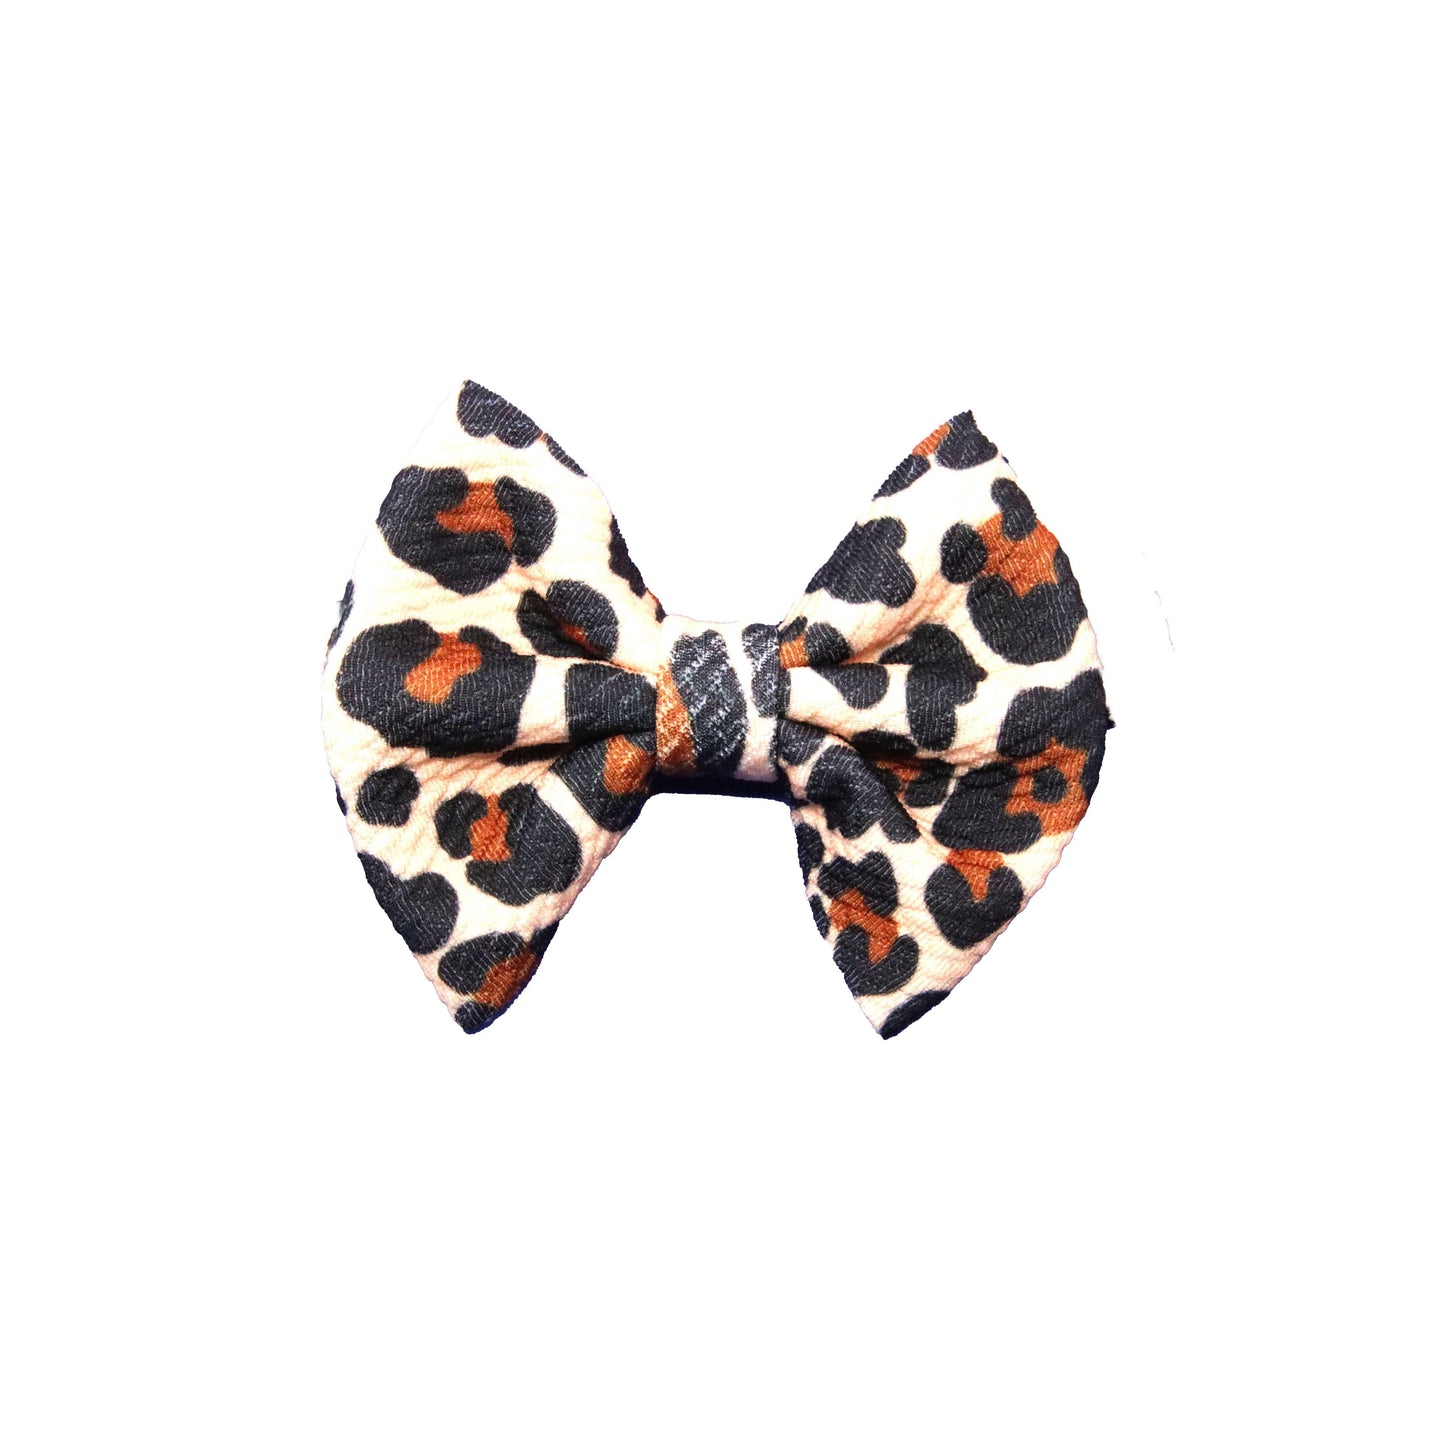 3", Bow, Hair Bow, Leopard Print, Fabric Bow, New Product - 04OCT2020